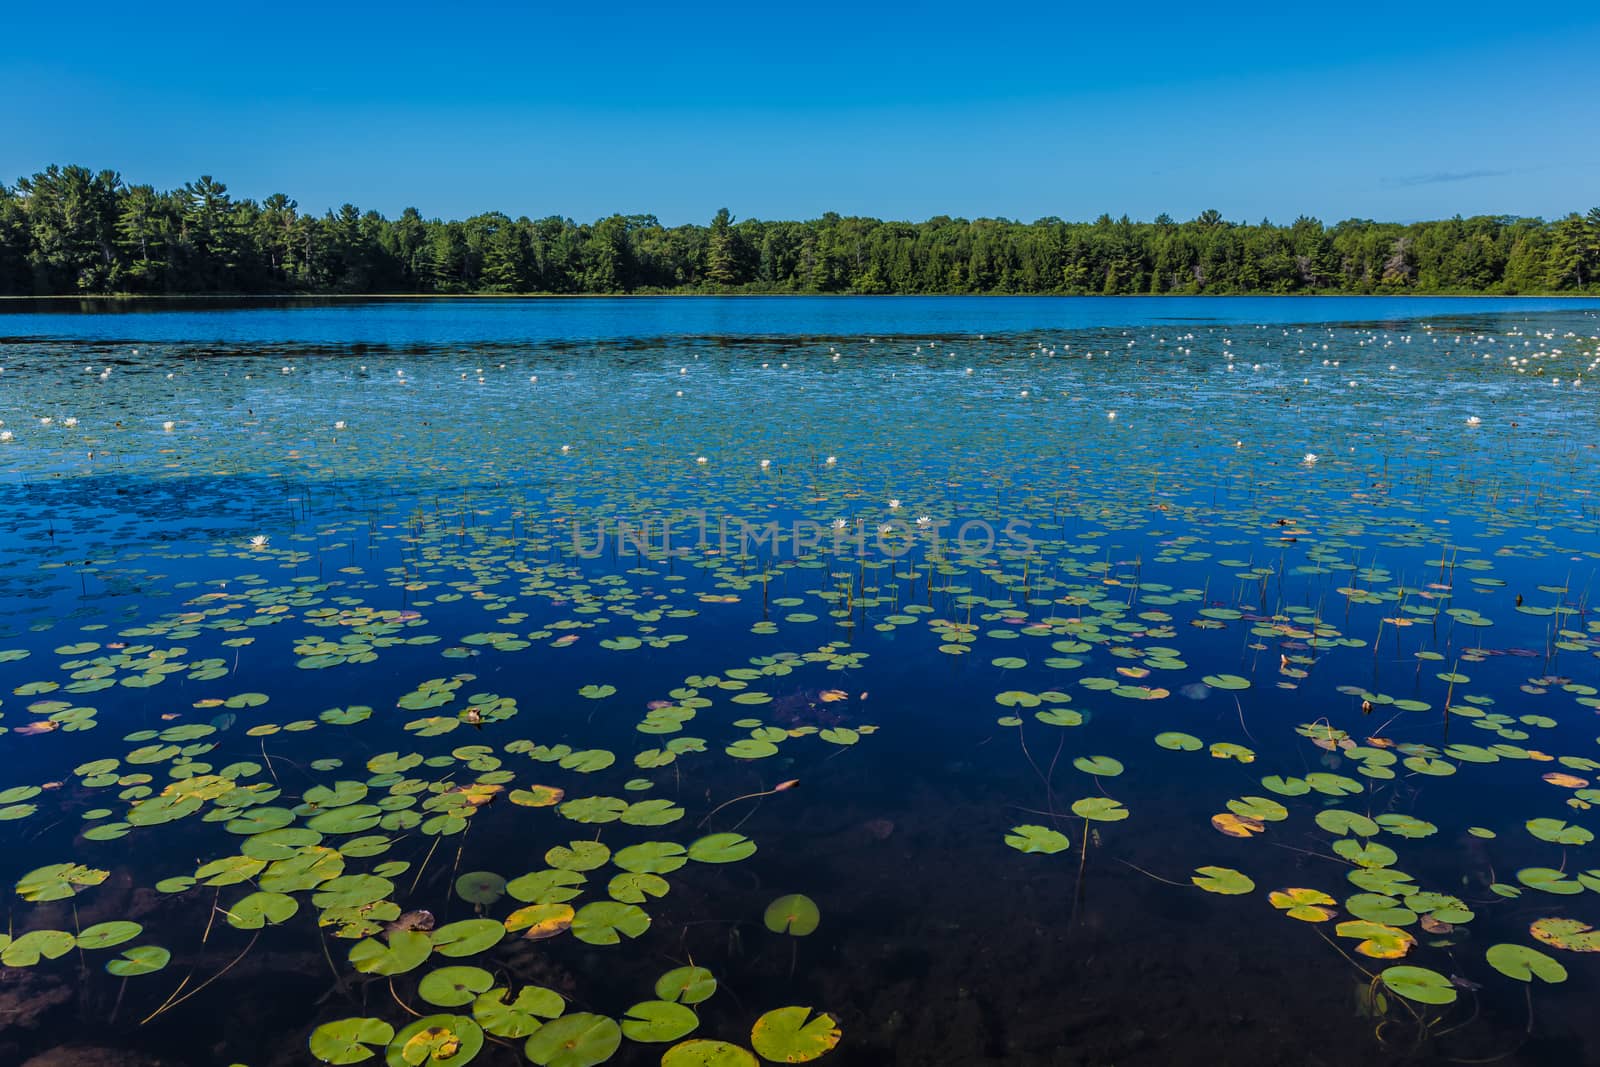 A lot of lily pads on a lake by petkolophoto